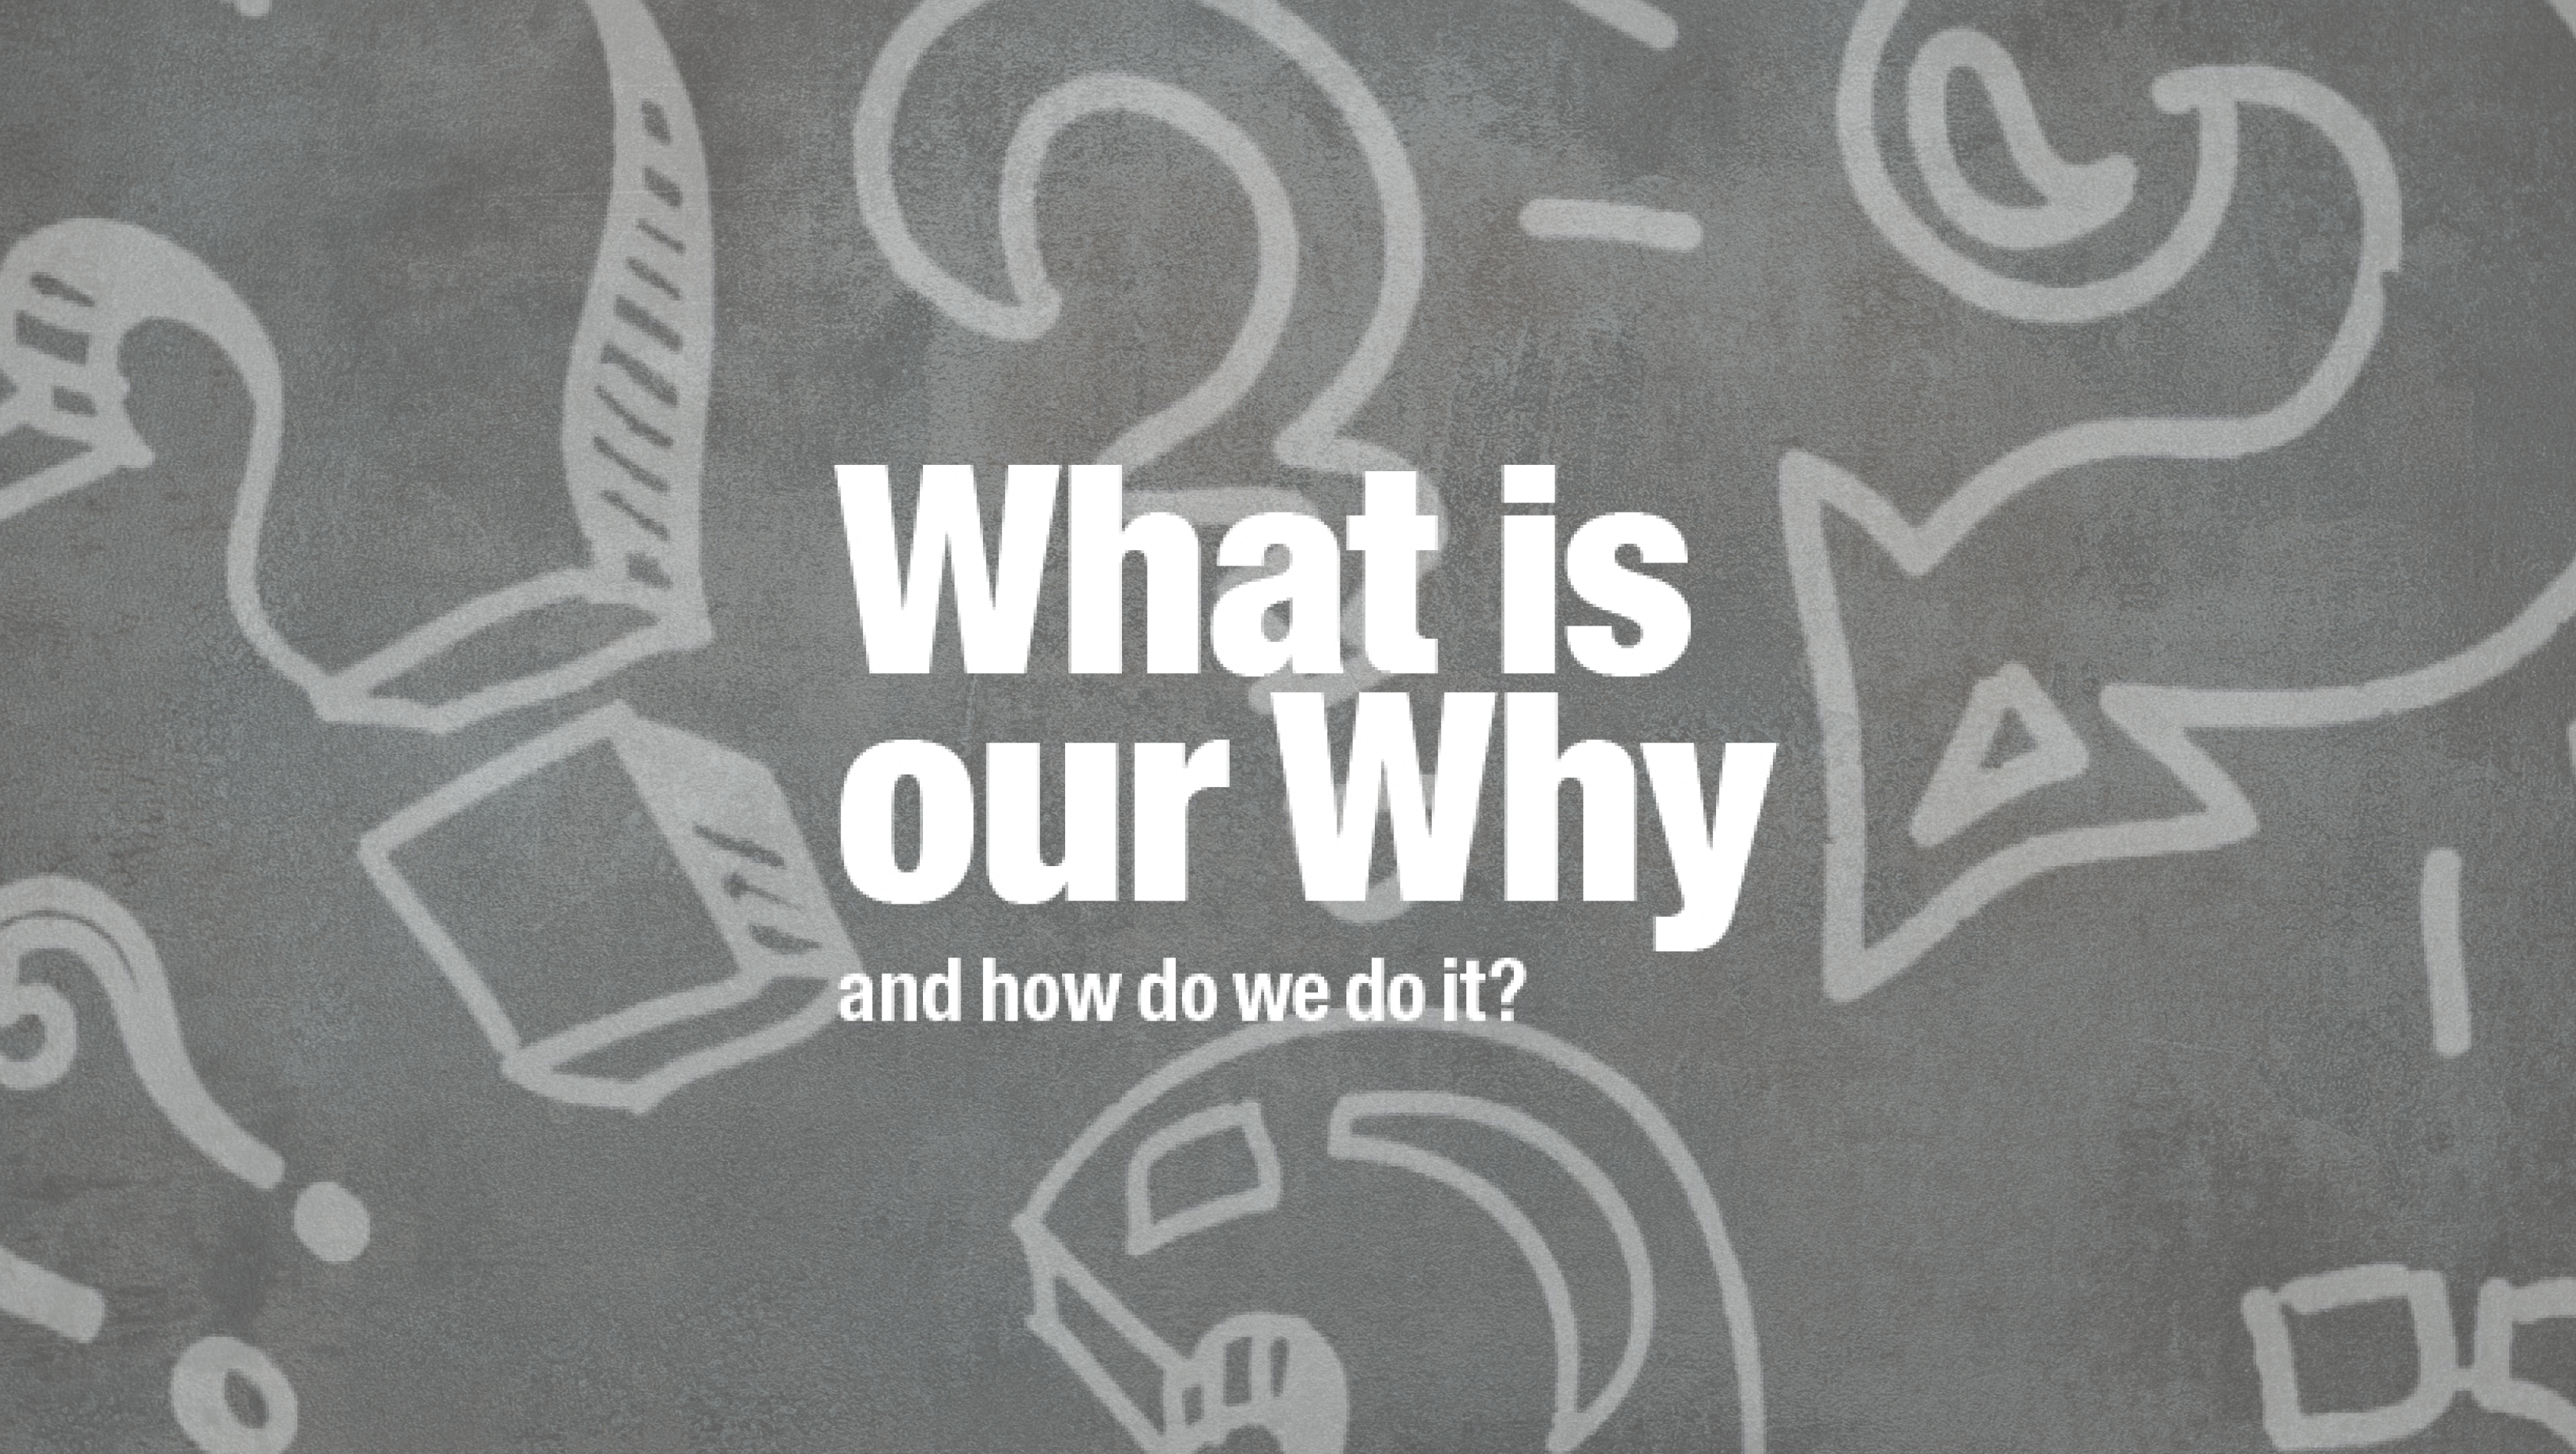 Grey background with text that says what is our why?